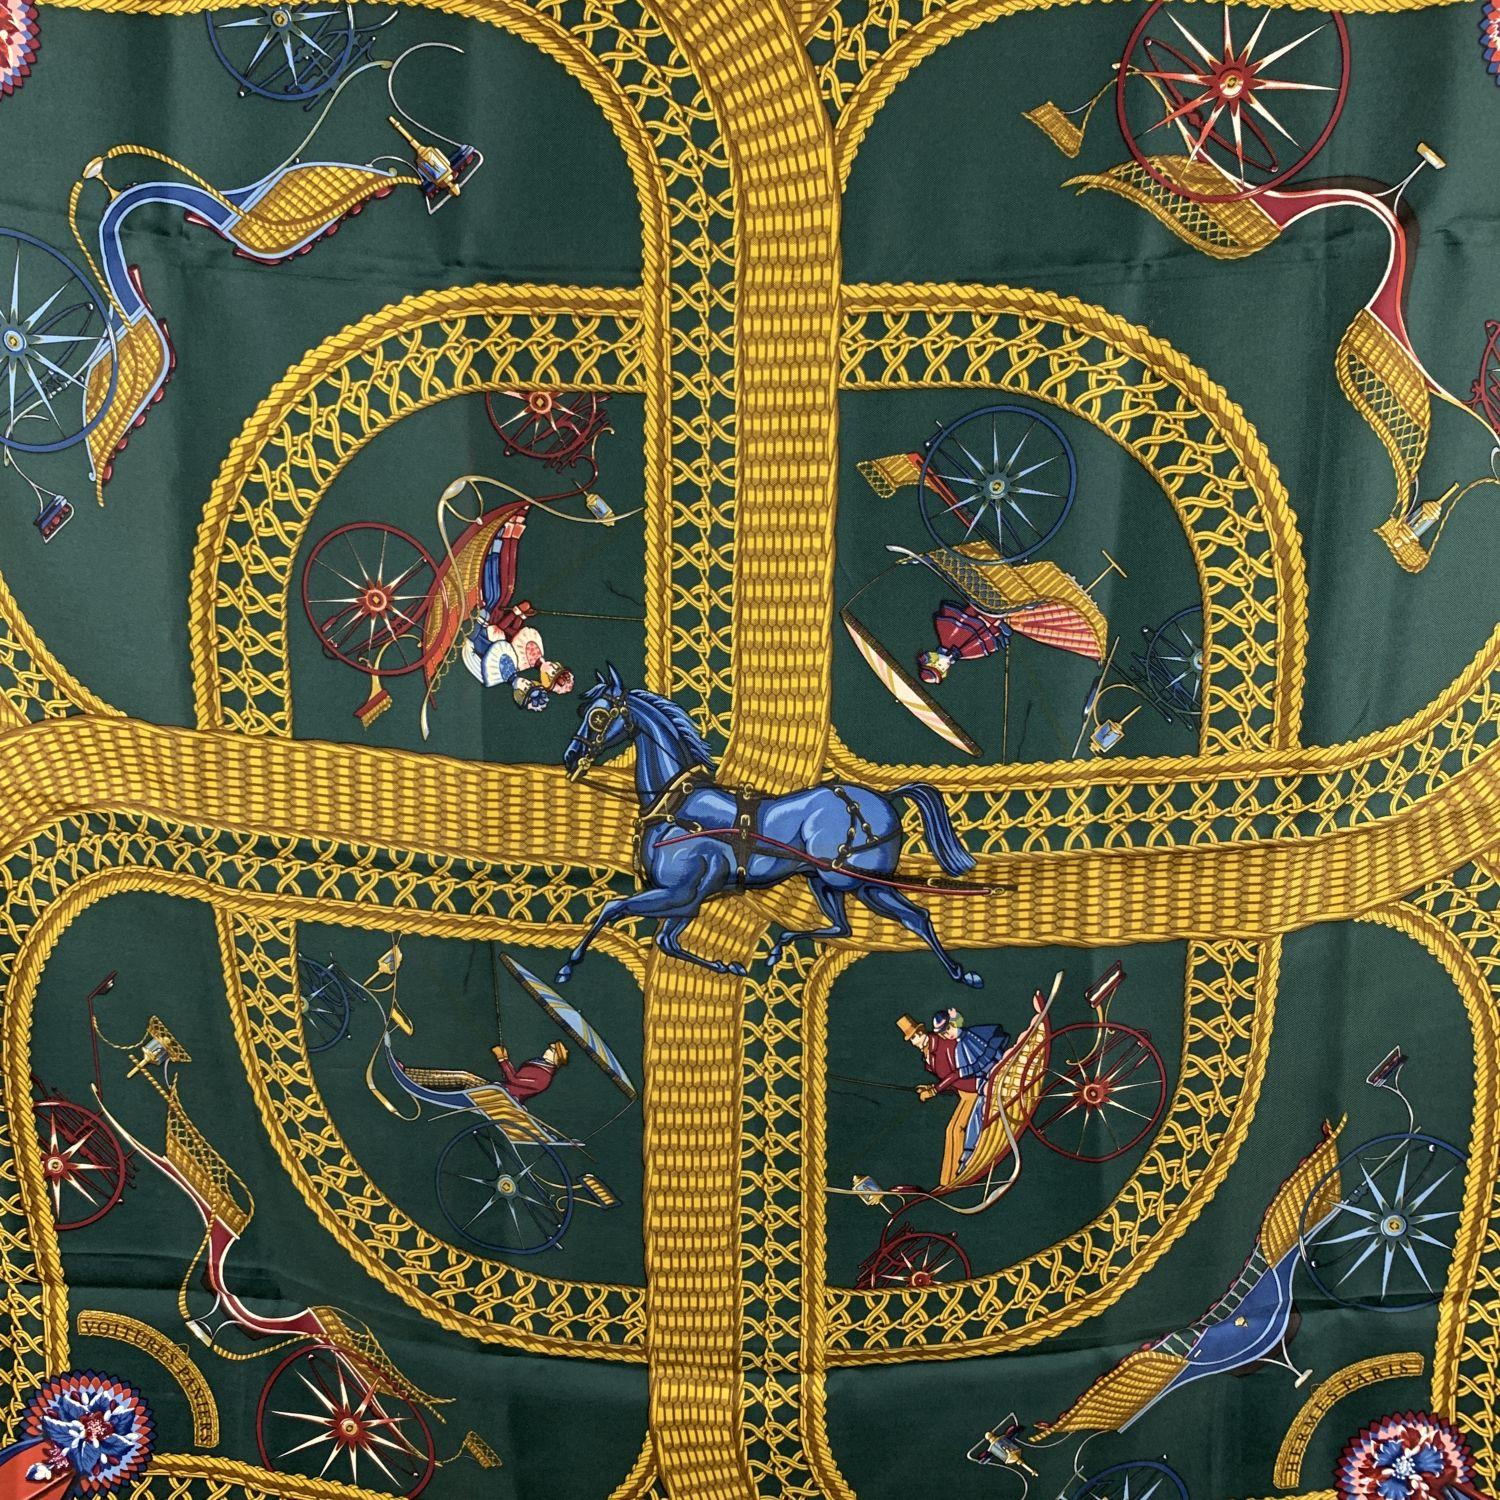 HERMES silk scarf named 'Voitures Paniers' designed by Julie Abadie and issued the first time in 1984. It has re-issued in 1990/1991. It depicts some wicker carriages. Main colors are dark green, yellow and red. Hand rolled edges. Measurements: